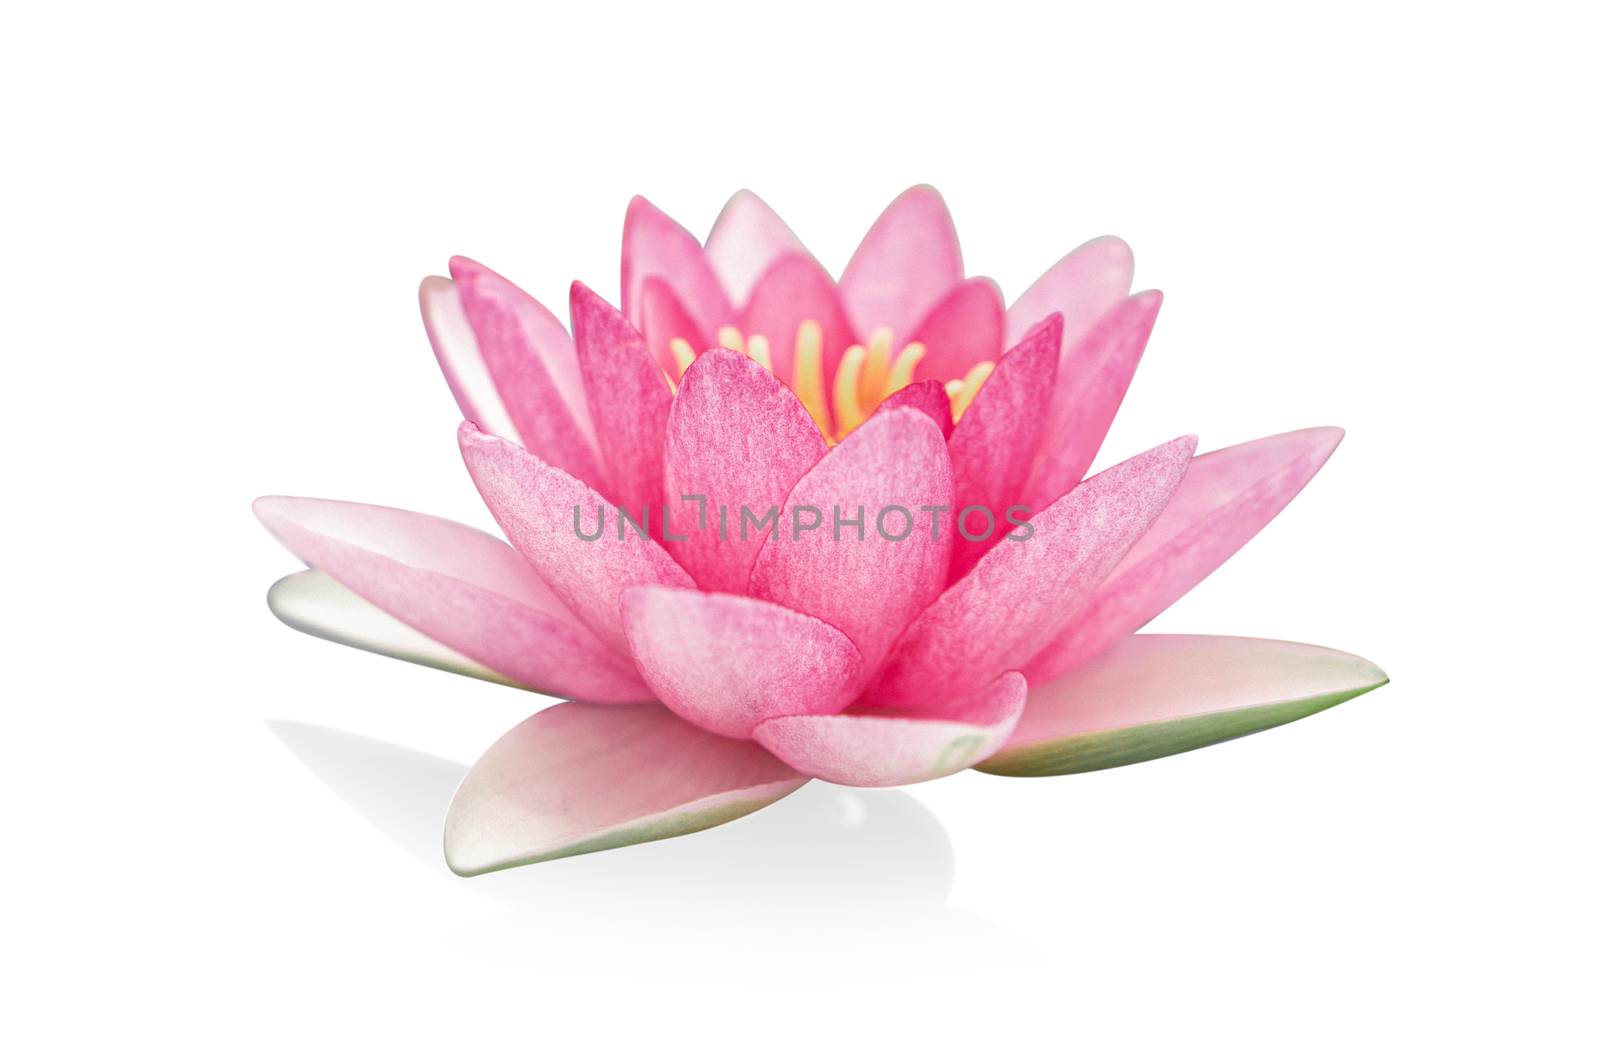 Close up pink lotus flower plant isolated on white background by pt.pongsak@gmail.com